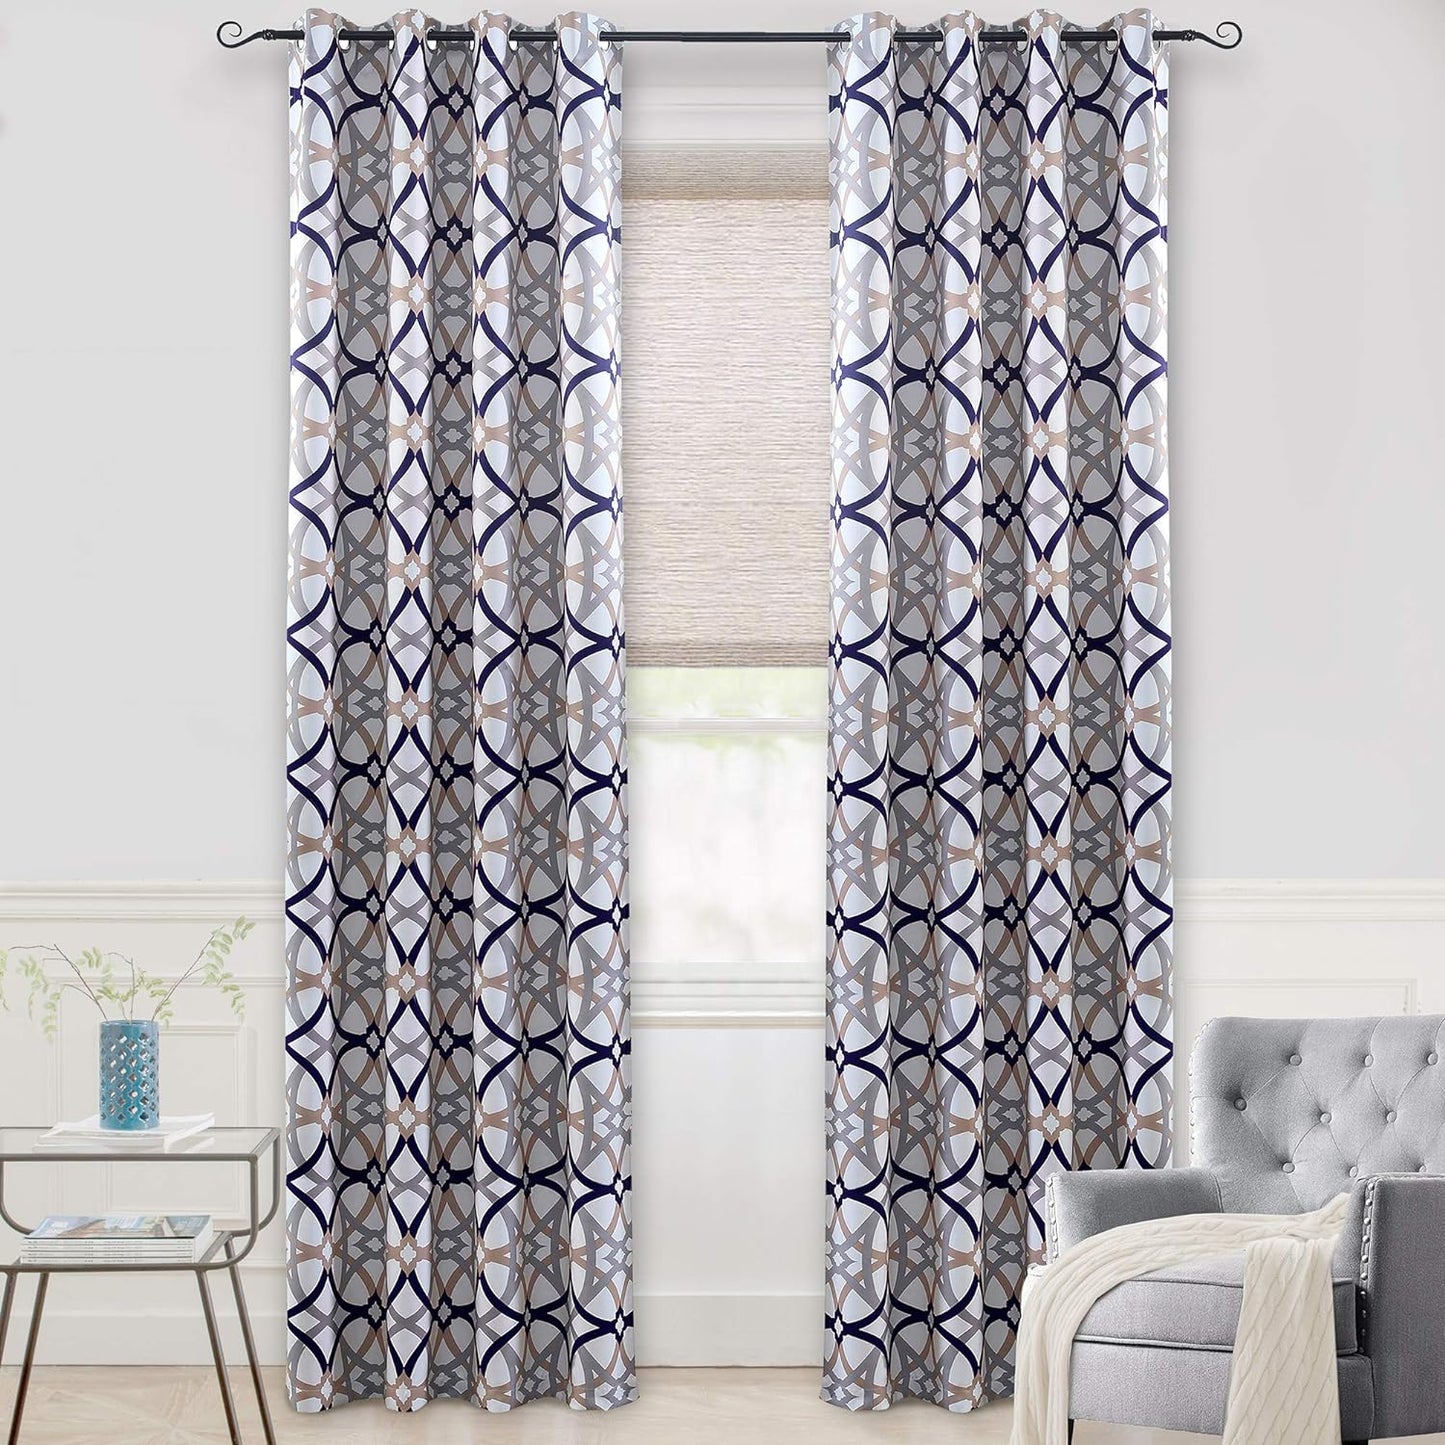 Driftaway Alexander Thermal Blackout Grommet Unlined Window Curtains Spiral Geo Trellis Pattern Set of 2 Panels Each Size 52 Inch by 84 Inch Red and Gray  DriftAway Navy/Gray 52"X120" 